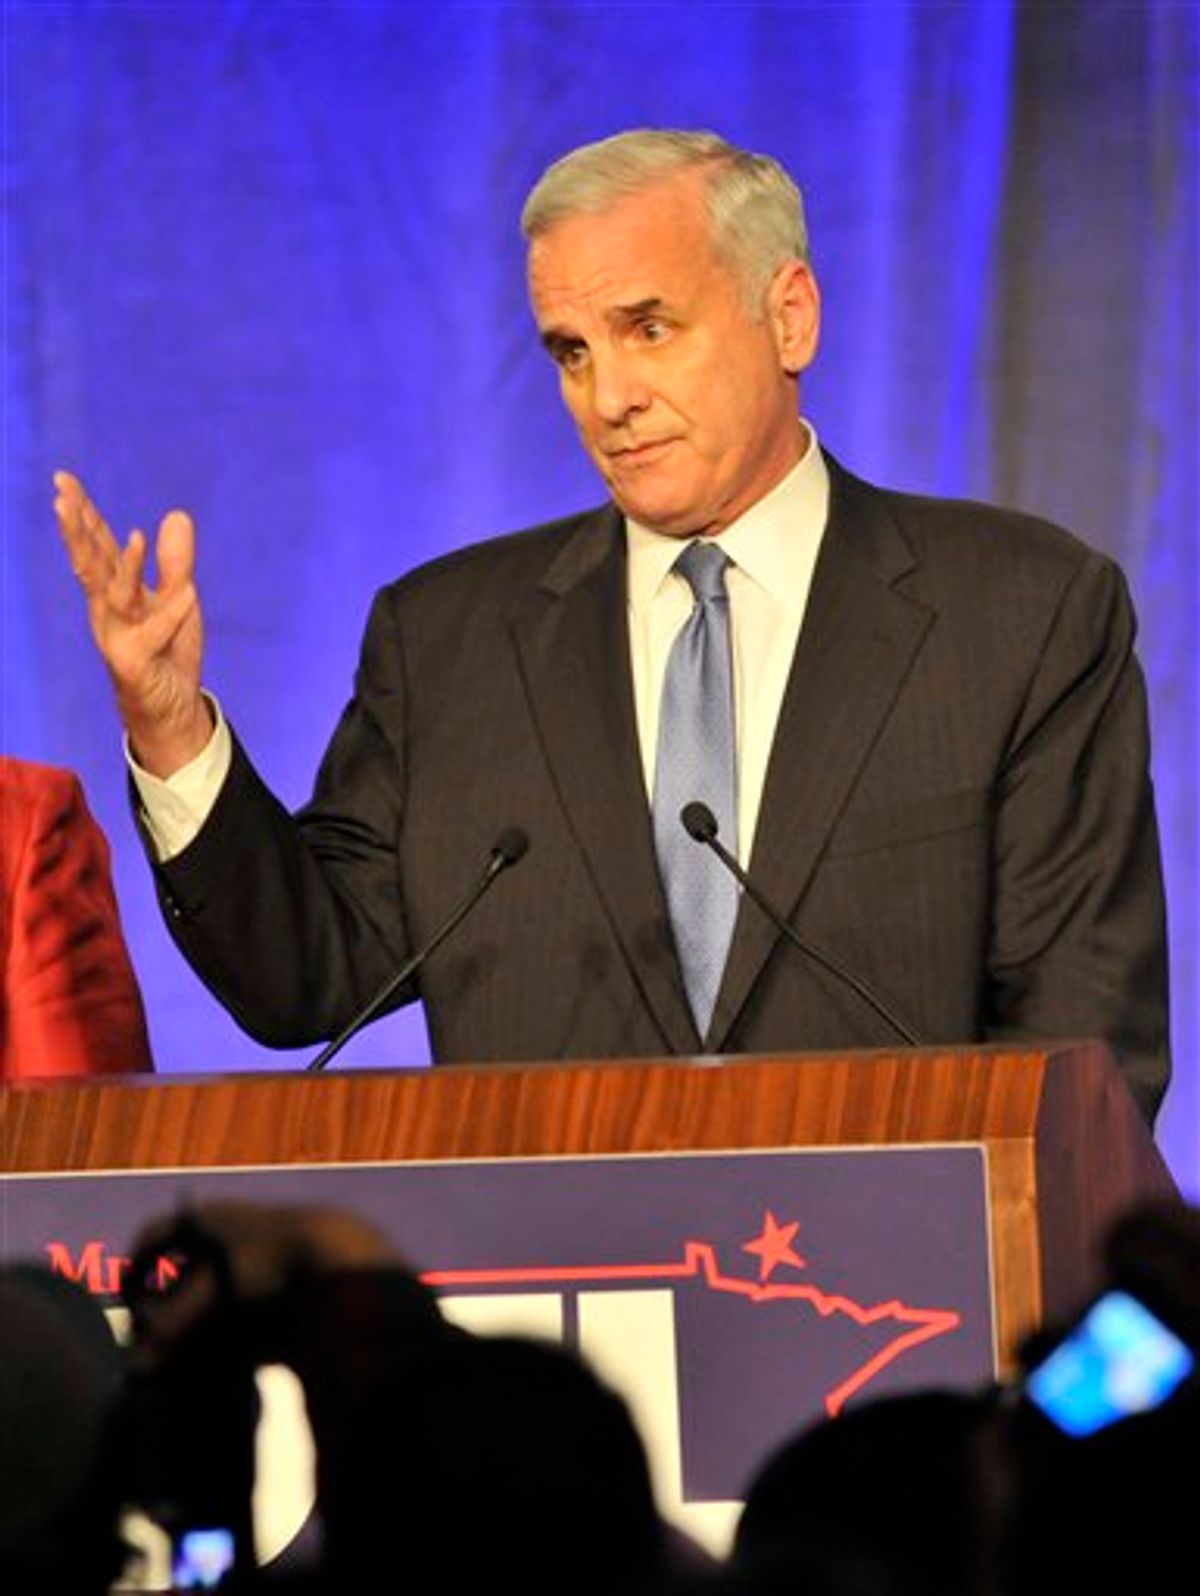 Minnesota Democratic gubernatorial candidate Mark Dayton addresses his supporters as he awaited the outcome of his race at his election night rally early Wednesday, Nov. 3, 2010 in Minneapolis. (AP Photo/Jim Mone) (AP)